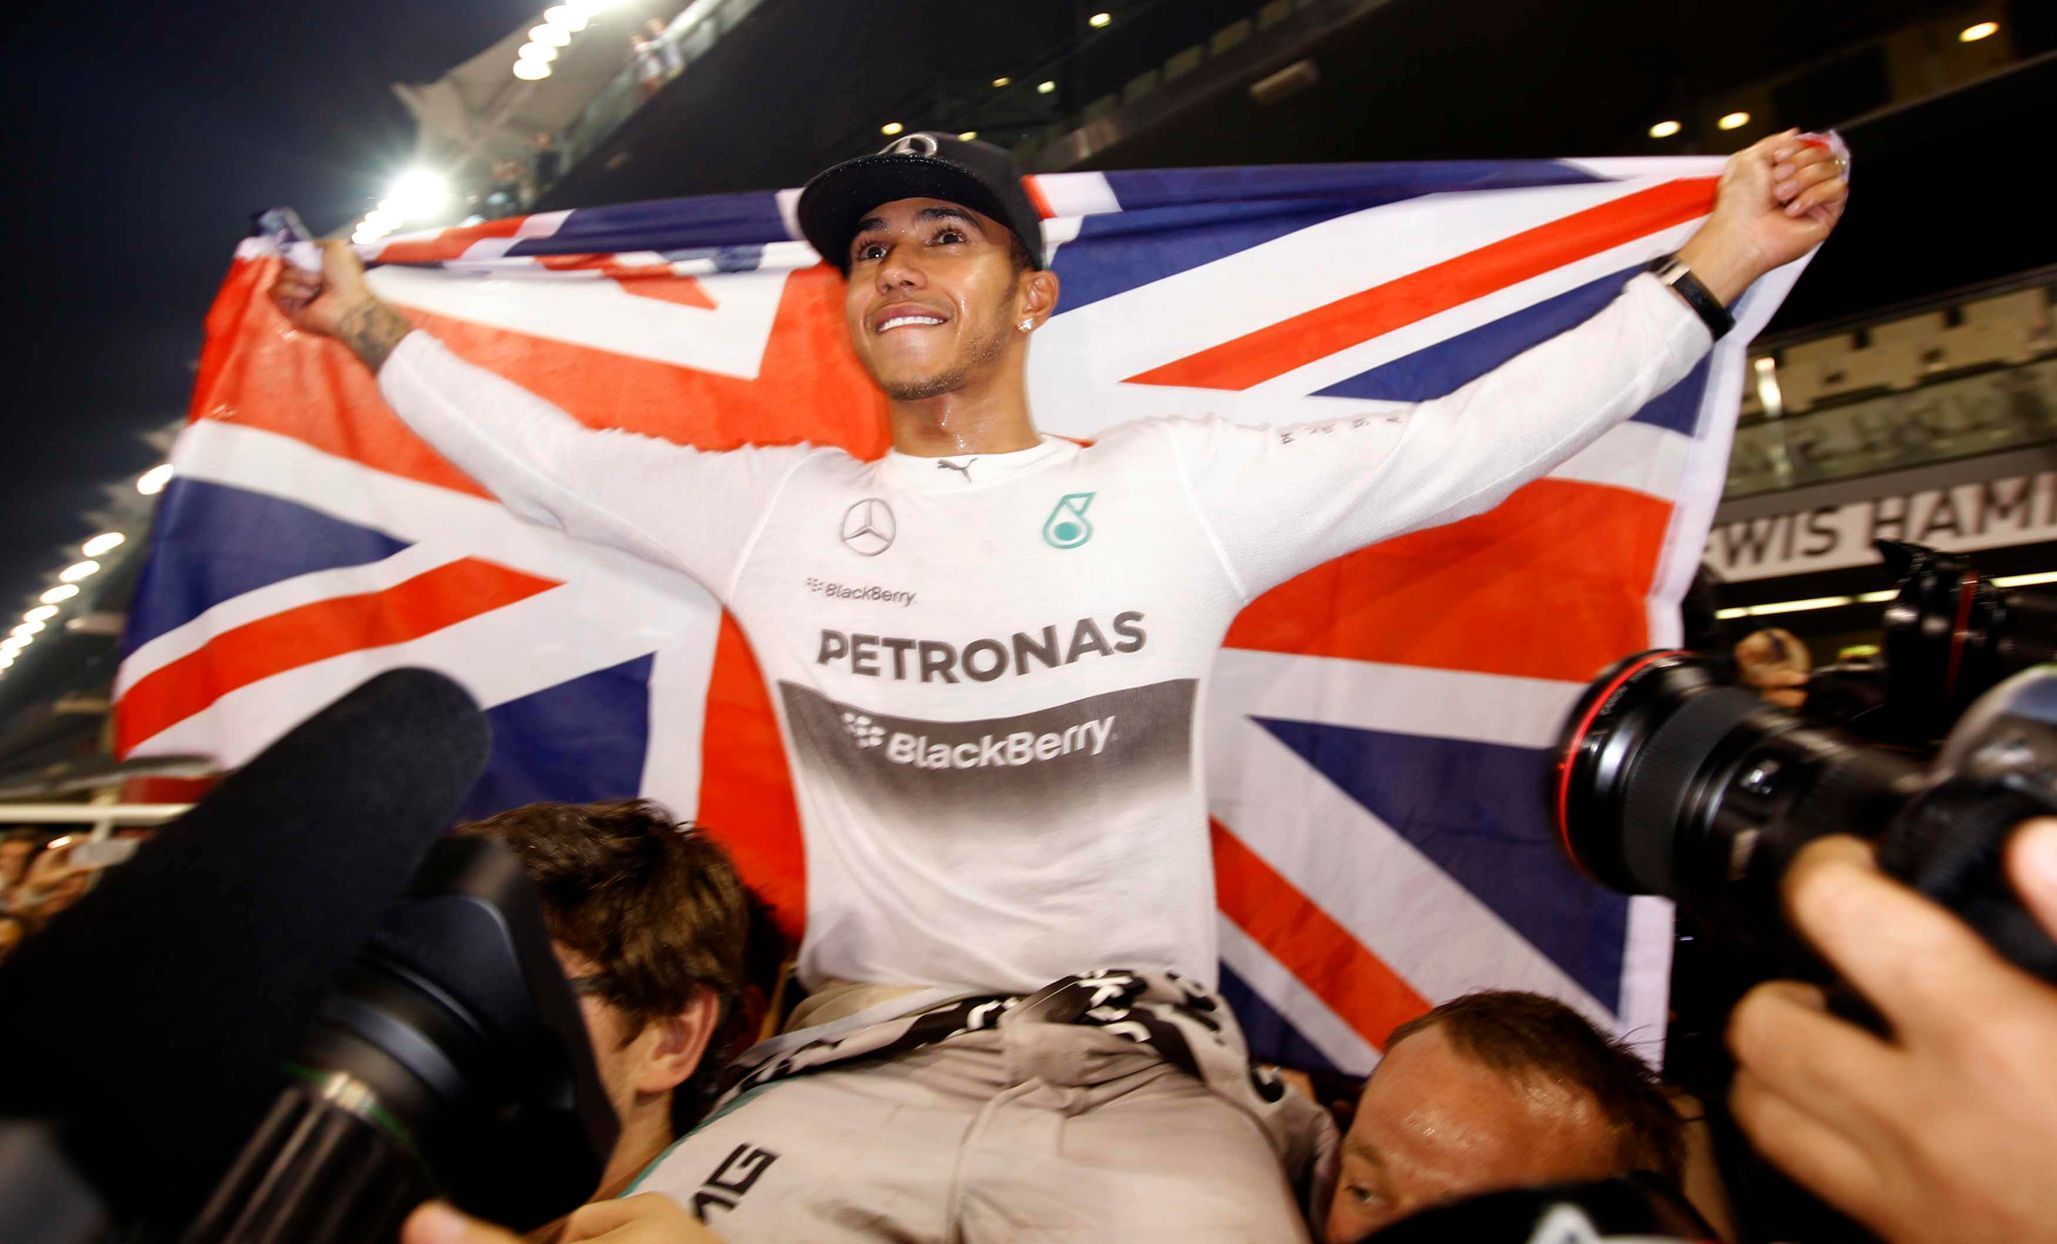 Mercedes Formula One driver Lewis Hamilton of Britain celebrates with his team after winning the Abu Dhabi F1 Grand Prix at the Yas Marina circuit in Abu Dhabi